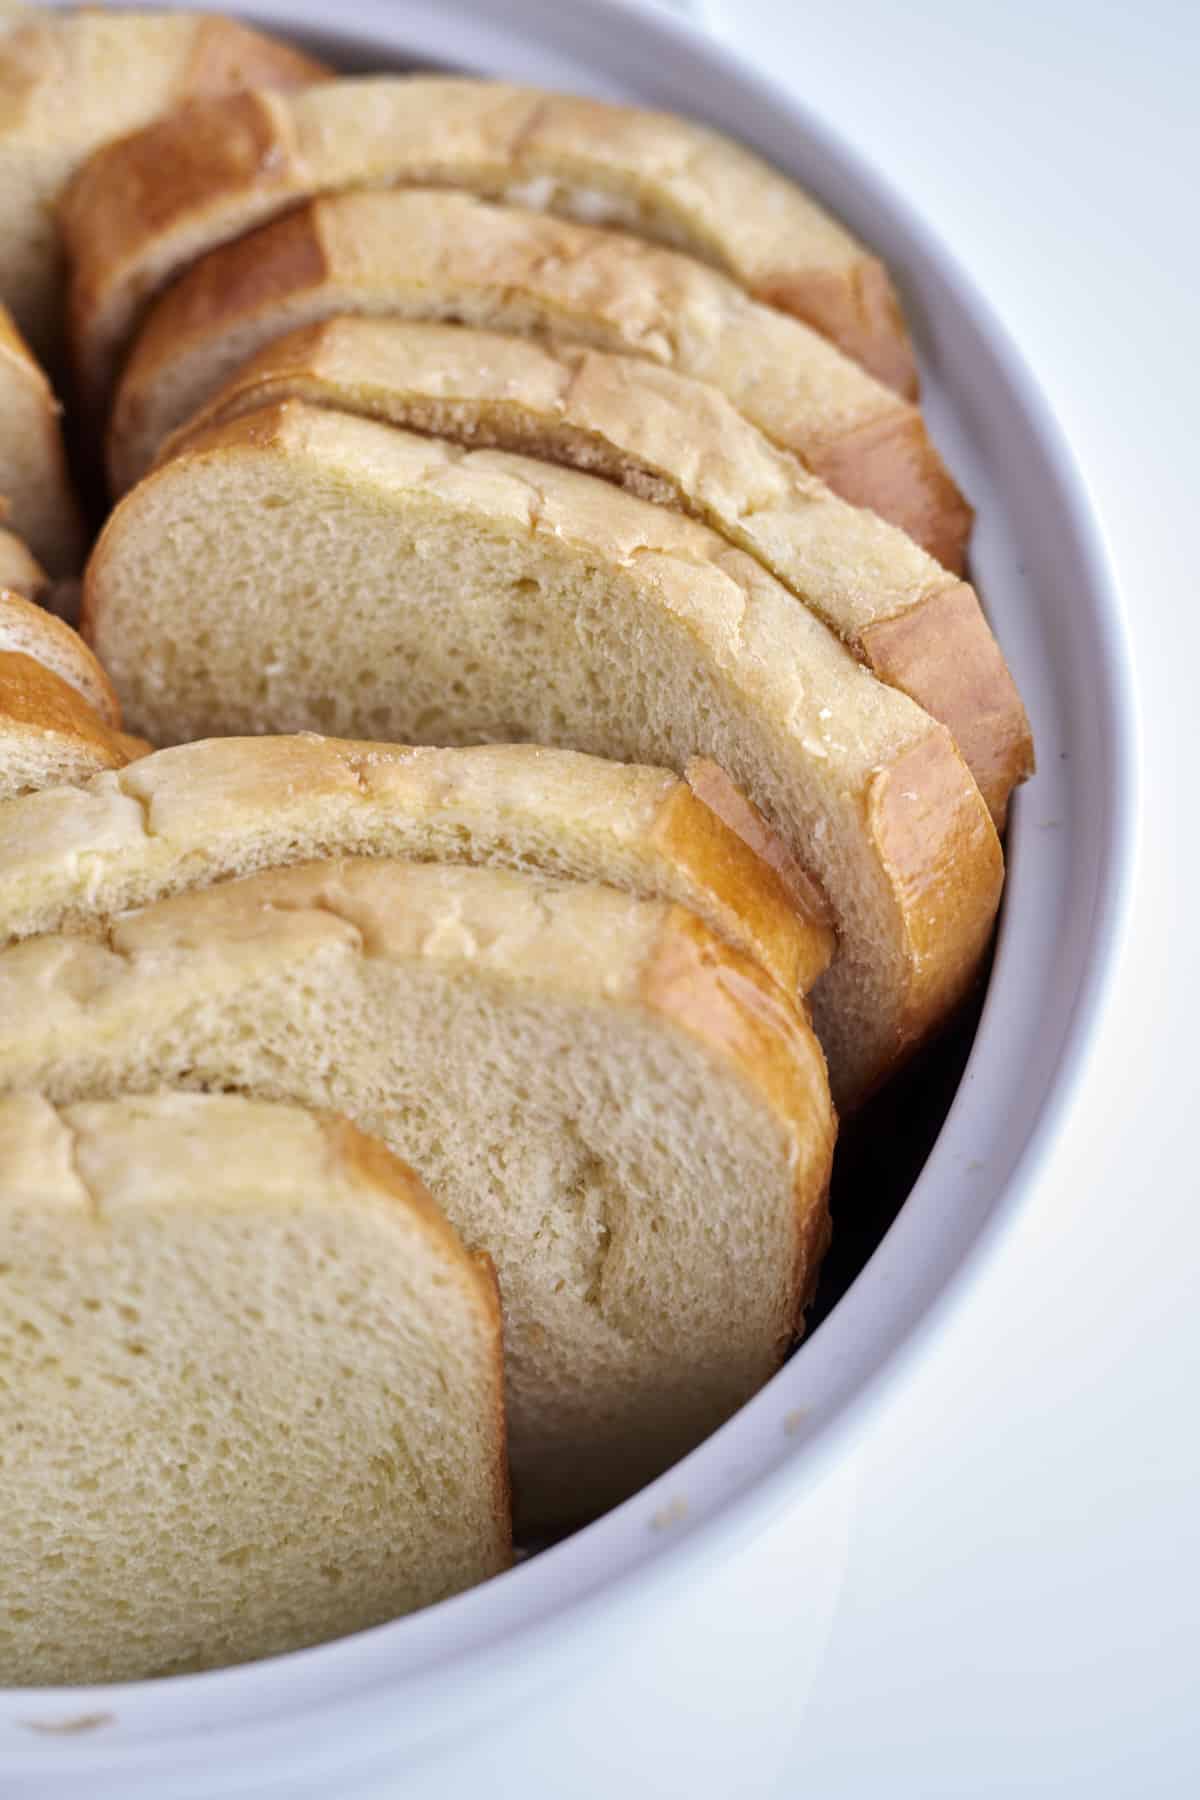 sliced brioche bread in a white baking dish ready to be baked